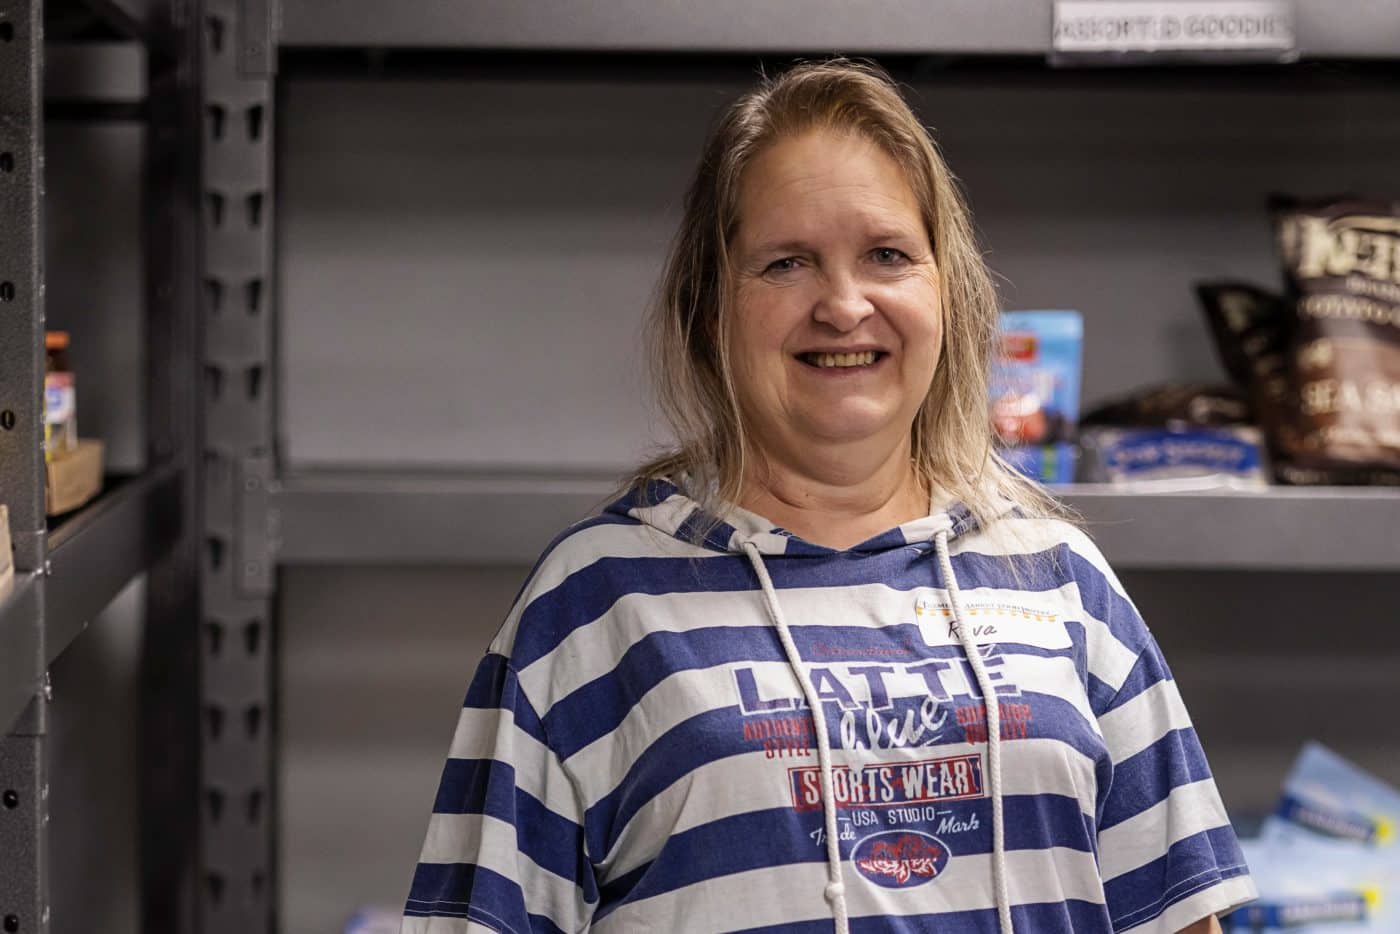 Older woman with blue and white striped shirt in front of pantry shelves